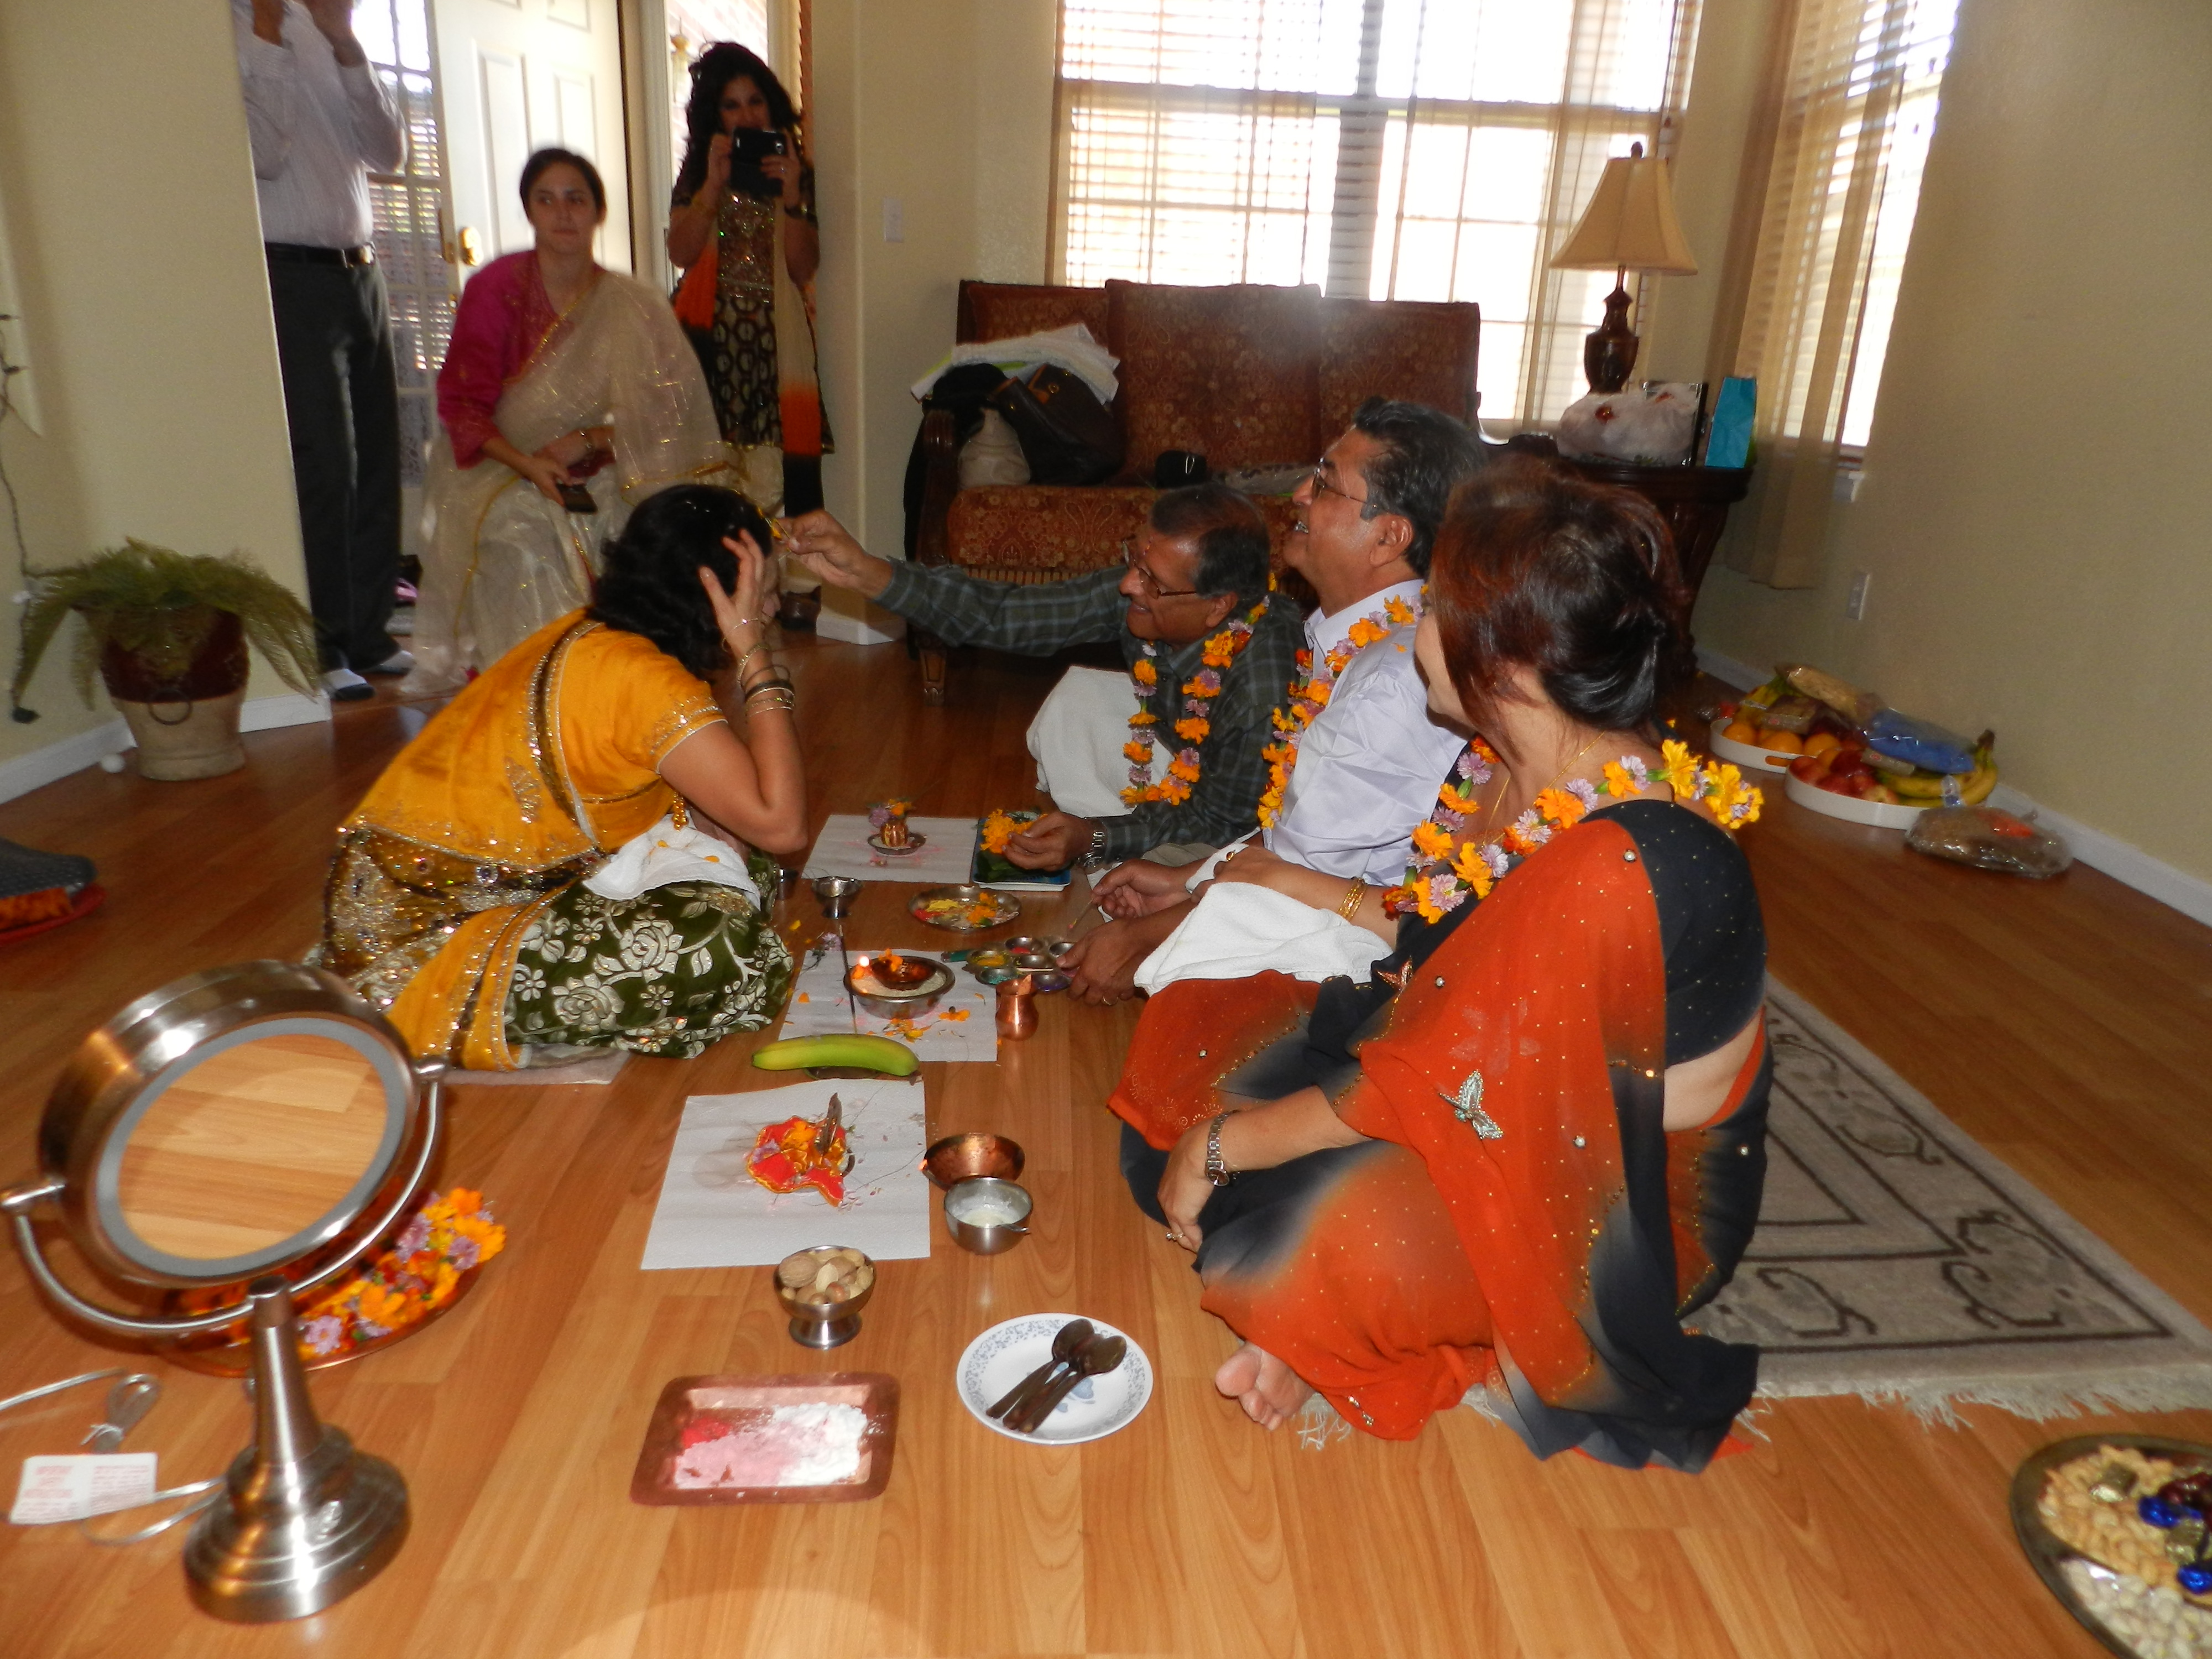 The ceremony honoring siblings on the fifth day of Tihar, also known as Diwali.